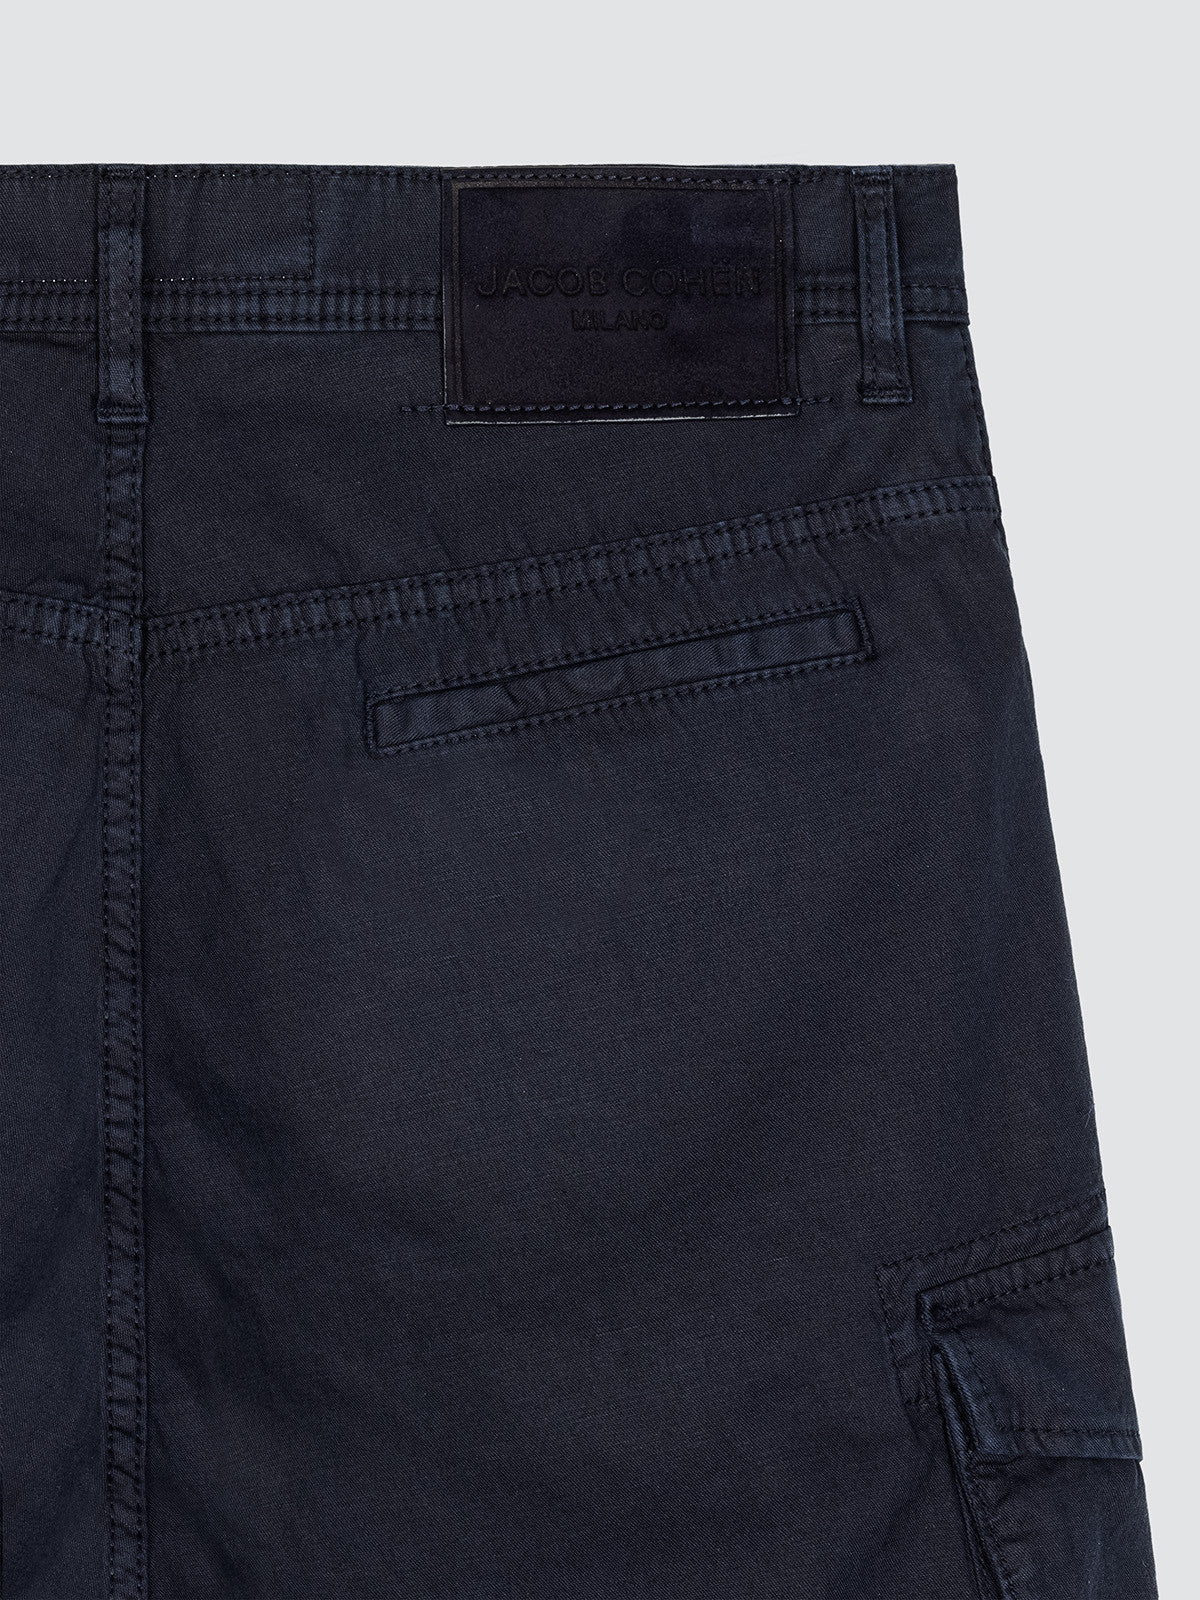 LIAM BLUE COTTON AND LINEN TWILL SHORTS